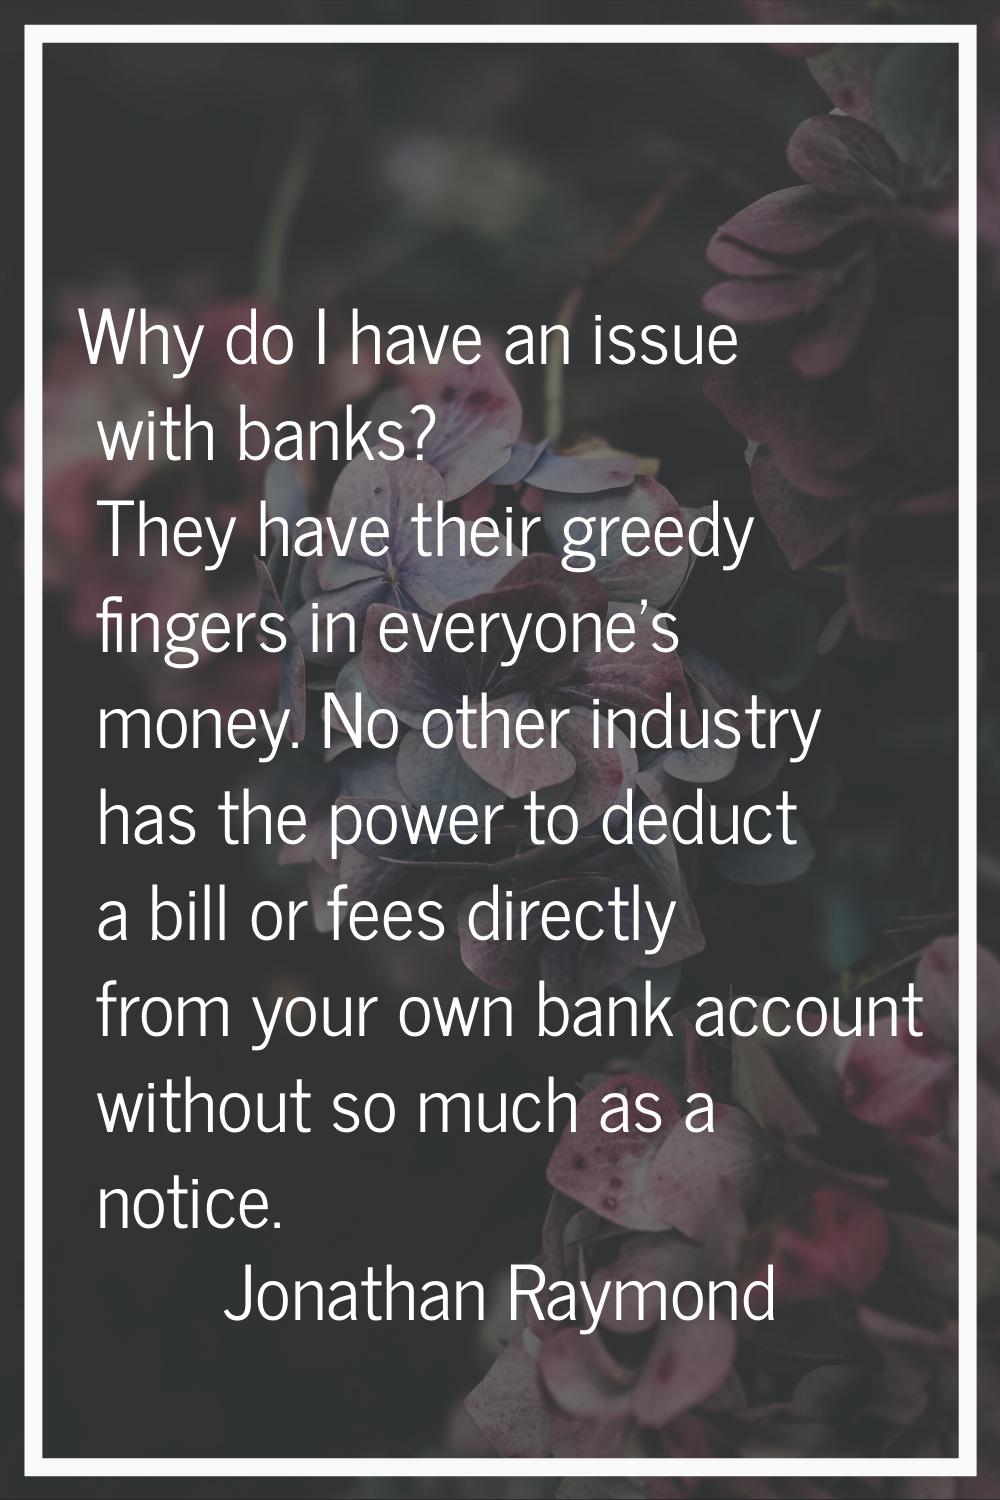 Why do I have an issue with banks? They have their greedy fingers in everyone's money. No other ind